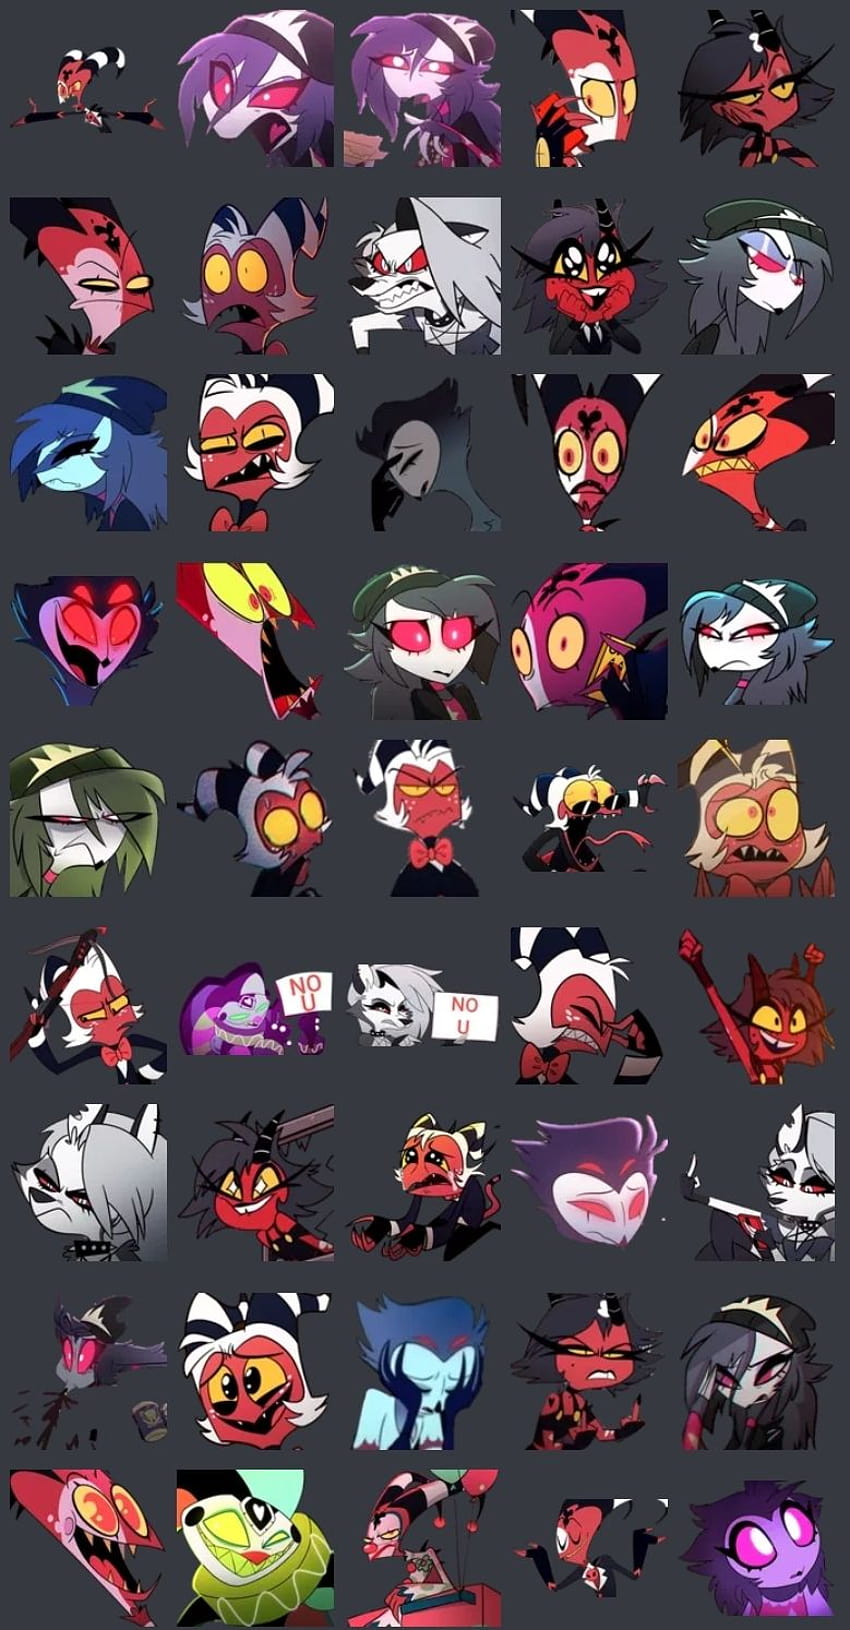 Helluva Boss Discord emotes. Help yourself to any you like! Having issues uploading the individual and there's an animated one I couldn't fit in the screenshot too but can't post alongside, helluva boss cherub HD phone wallpaper